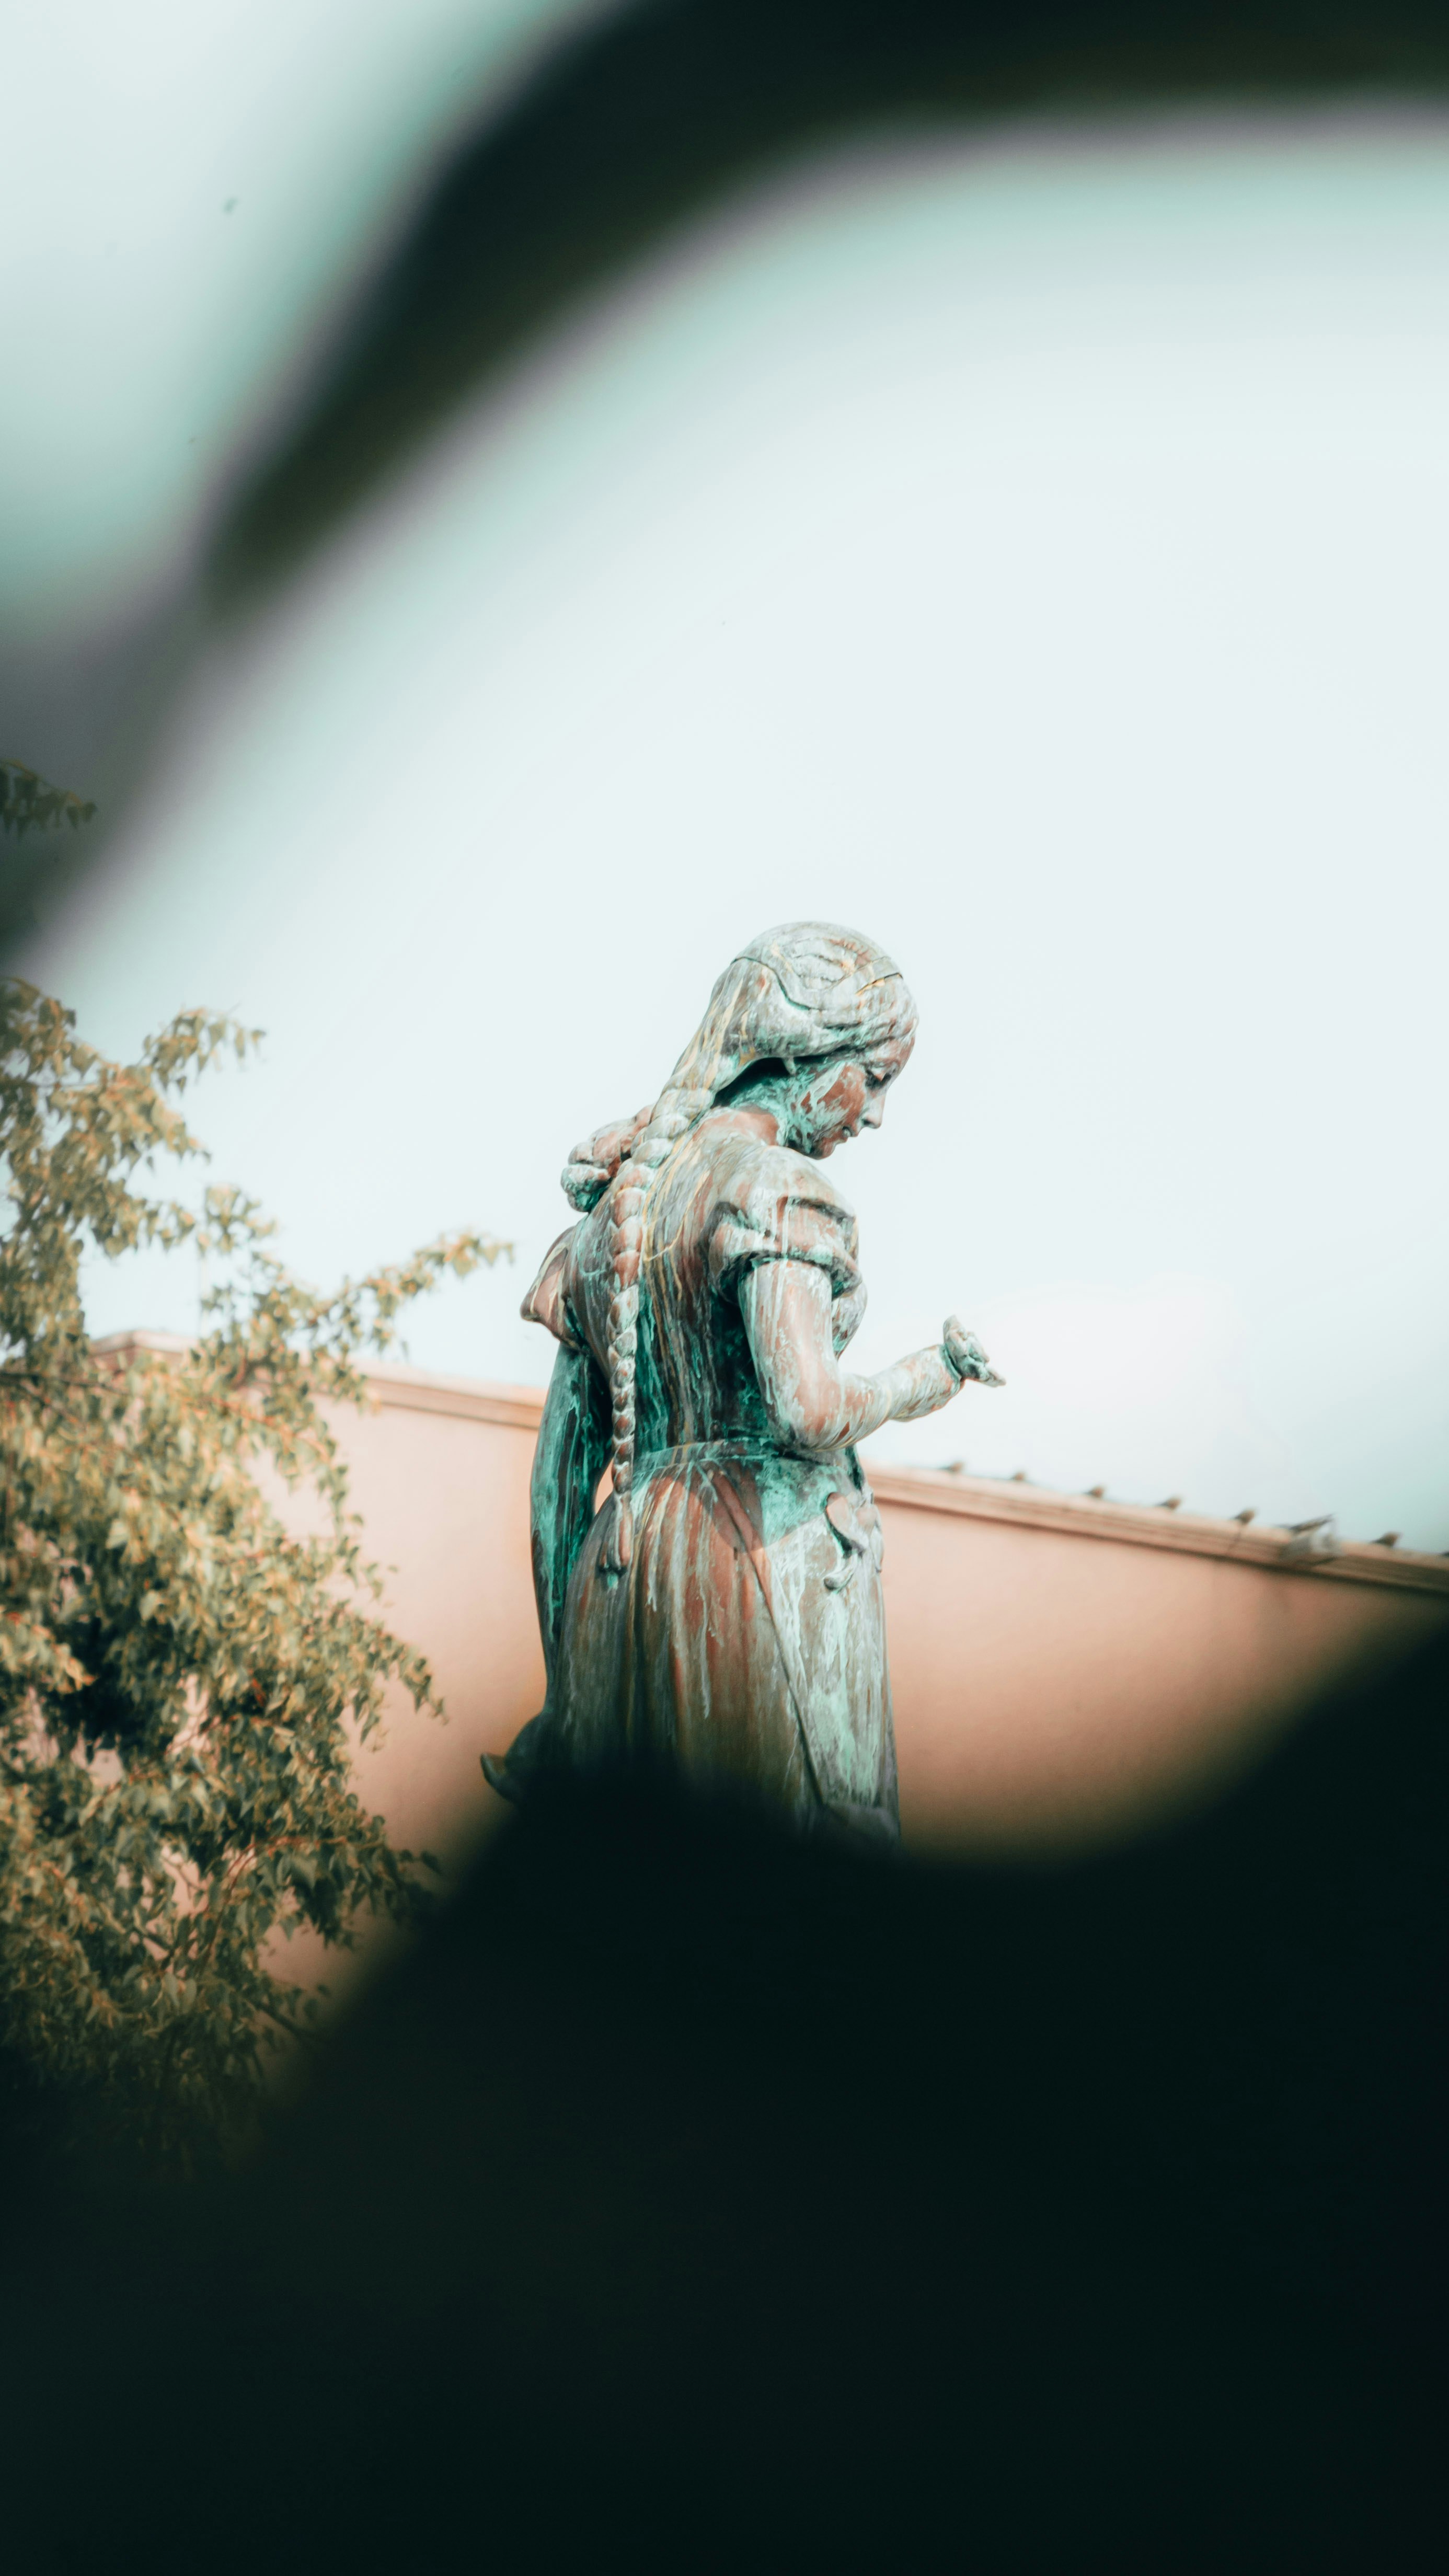 woman in dress statue near green trees during daytime